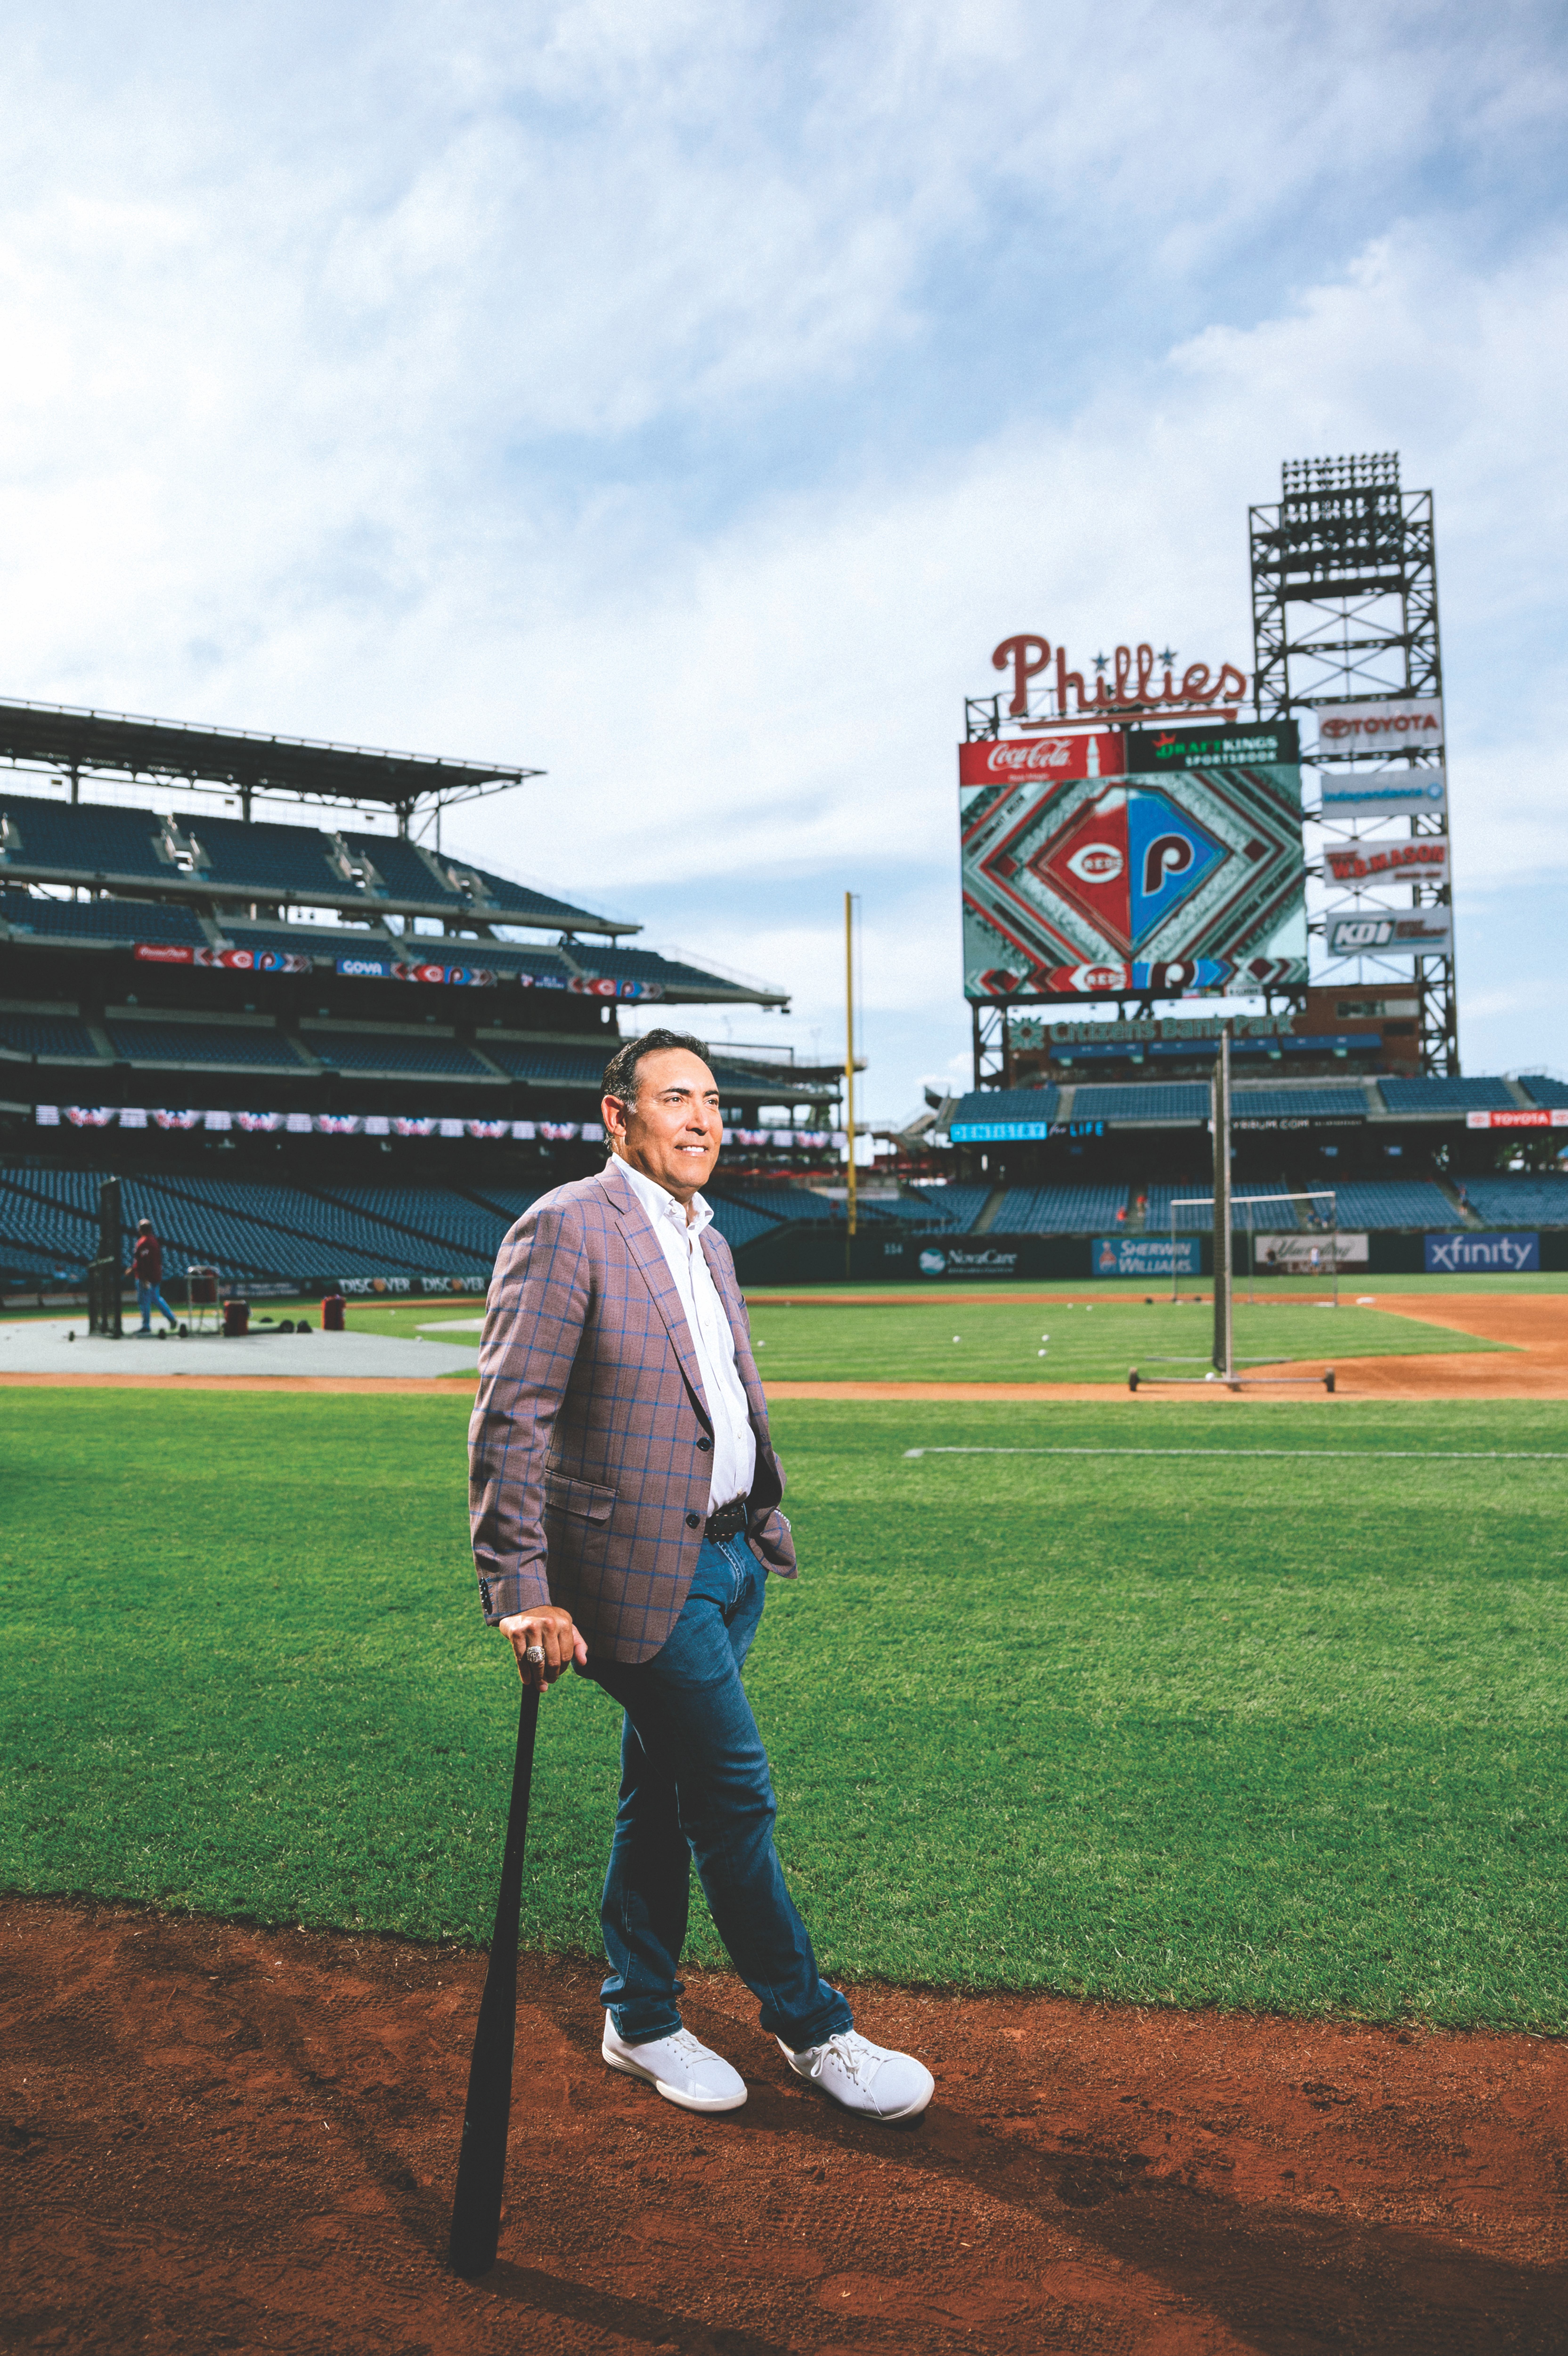 Five of Ruben Amaro's 8 MLB seasons were played with the Phillies. Photo: Dreamartstudio.vision